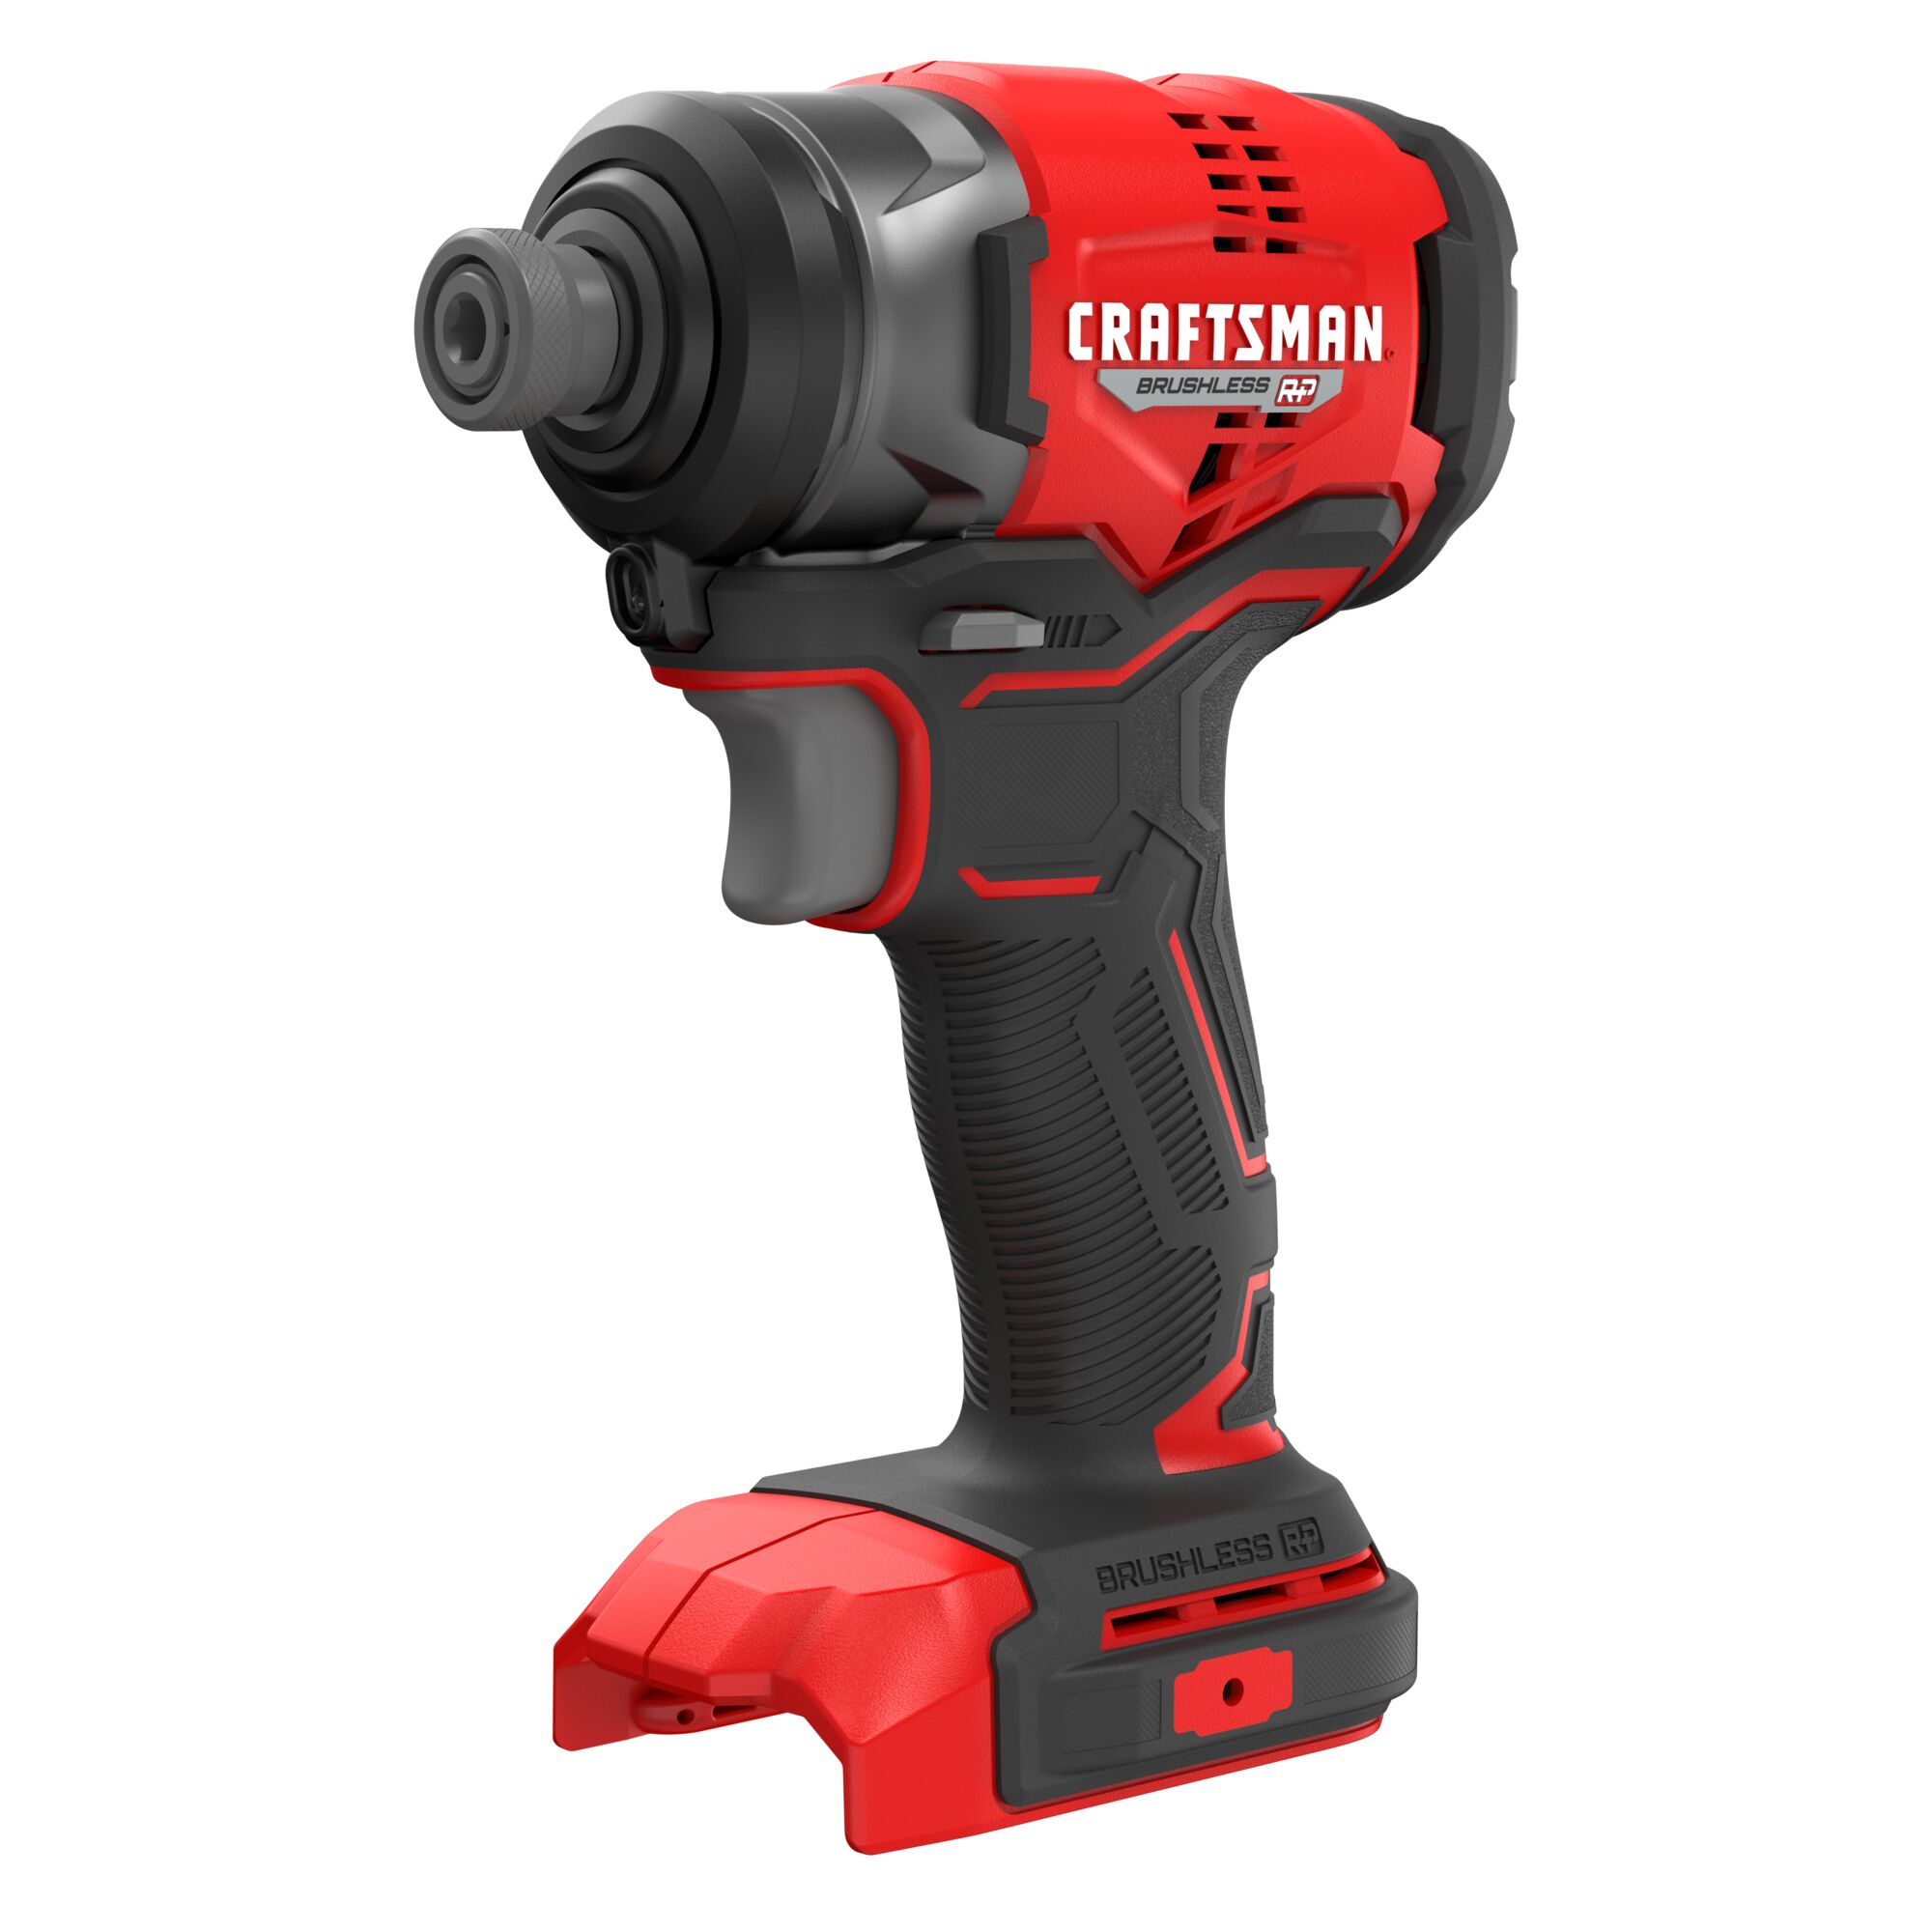 View of CRAFTSMAN Drills: Impact Driver on white background